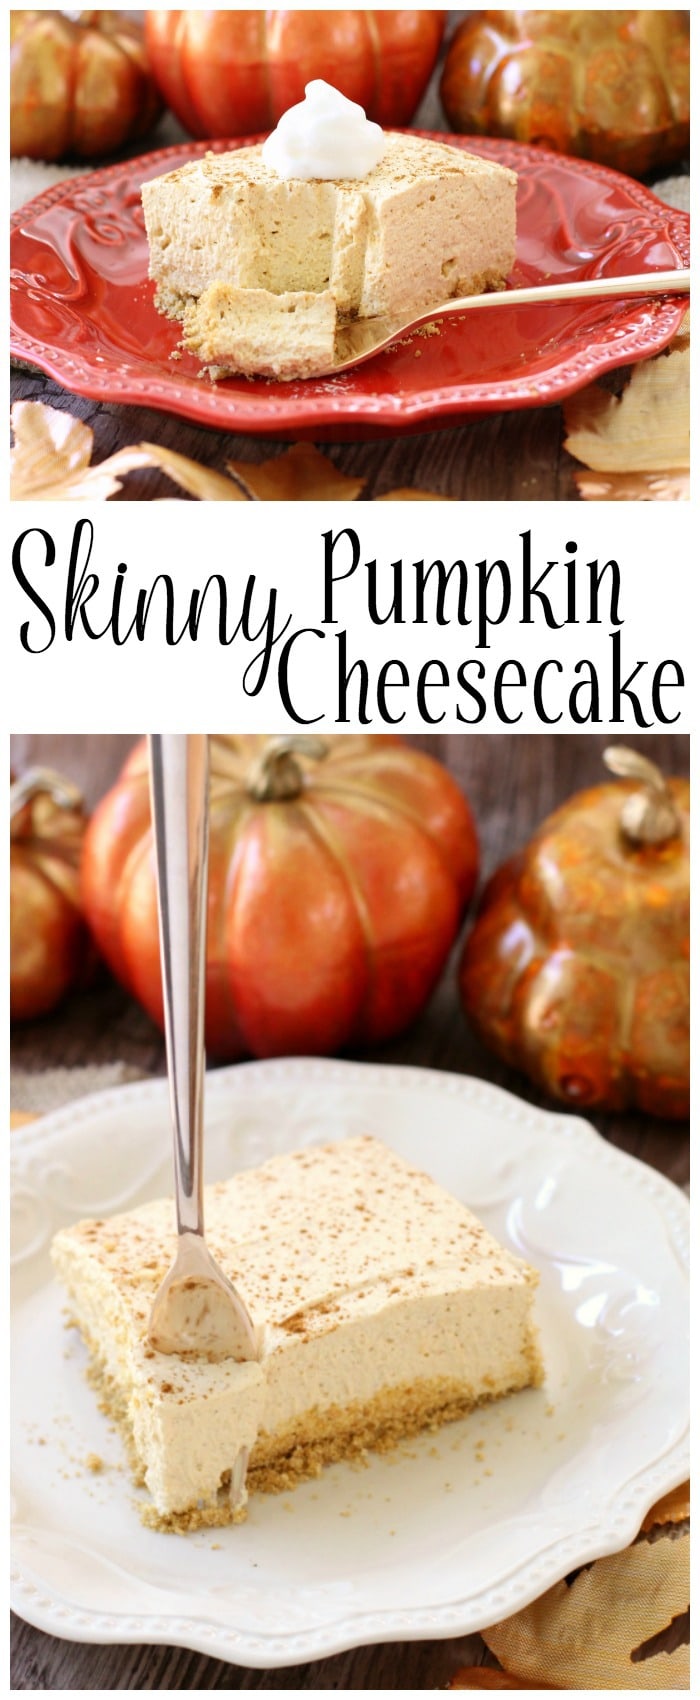 Skinny Pumpkin Cheesecake is a no-bake pumpkin cheesecake that is lighter than the traditional version but still has all the classic flavors that you love!